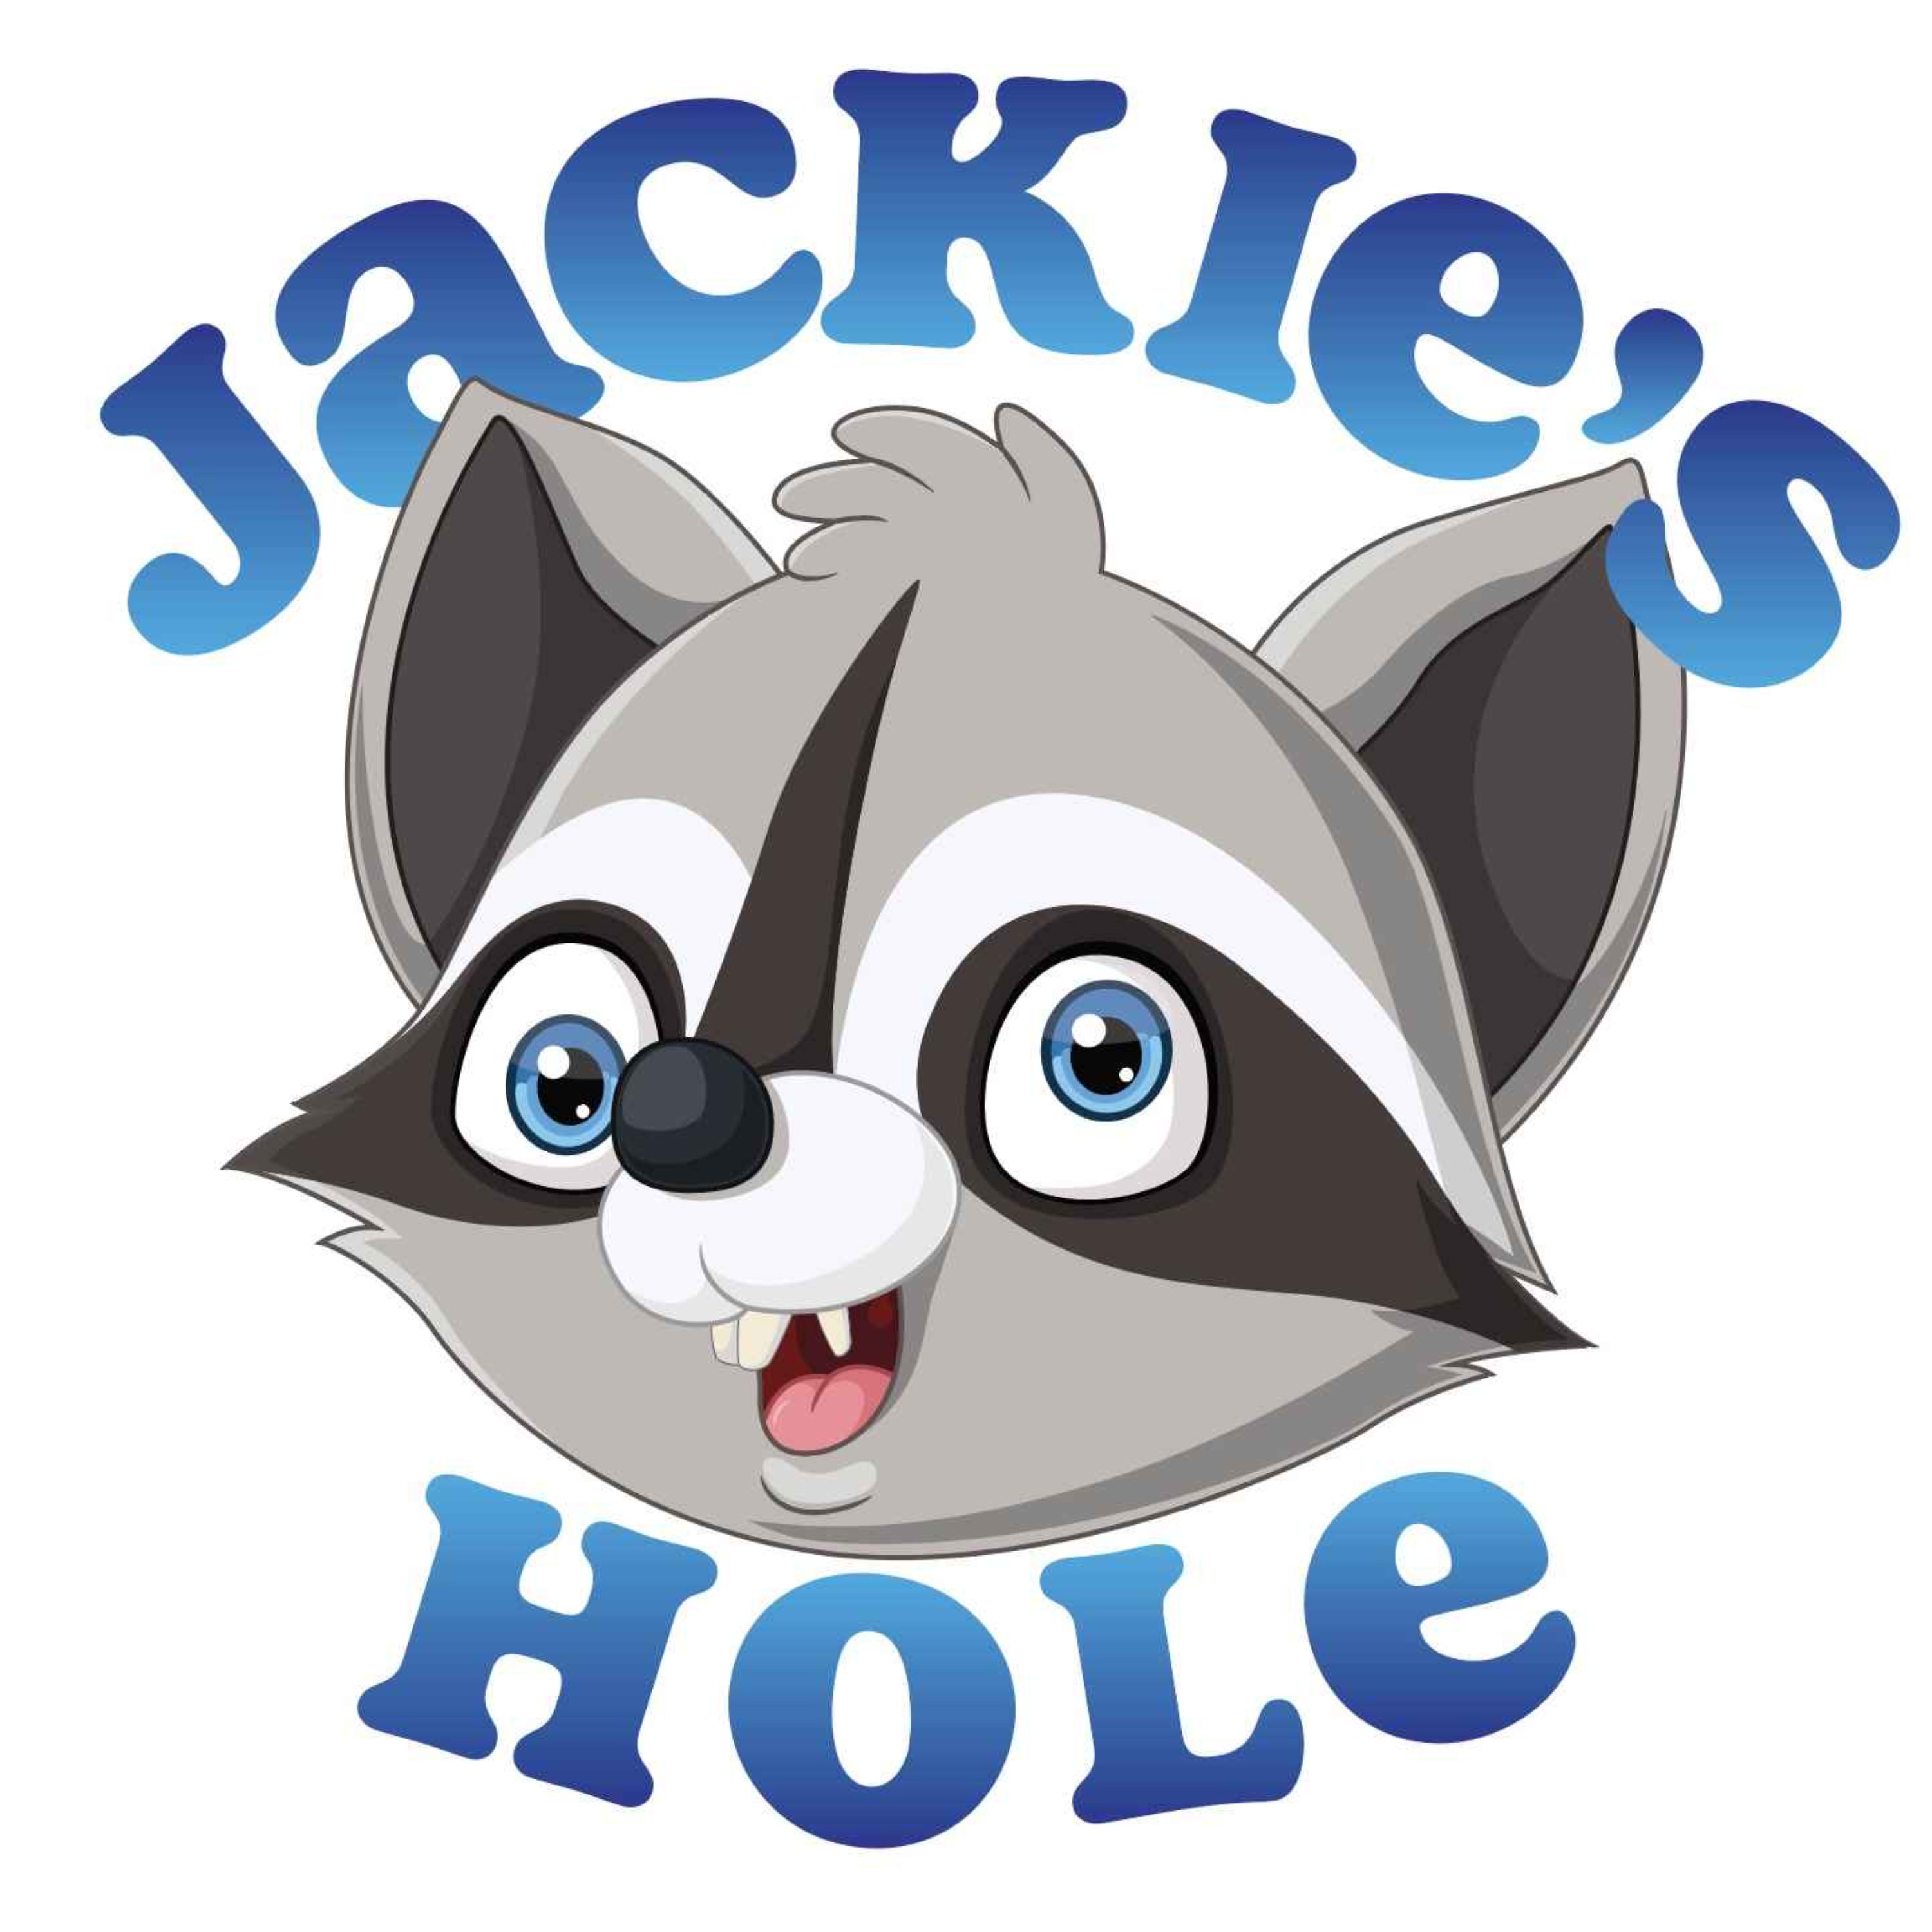 Introducing...Jackie’s Hole